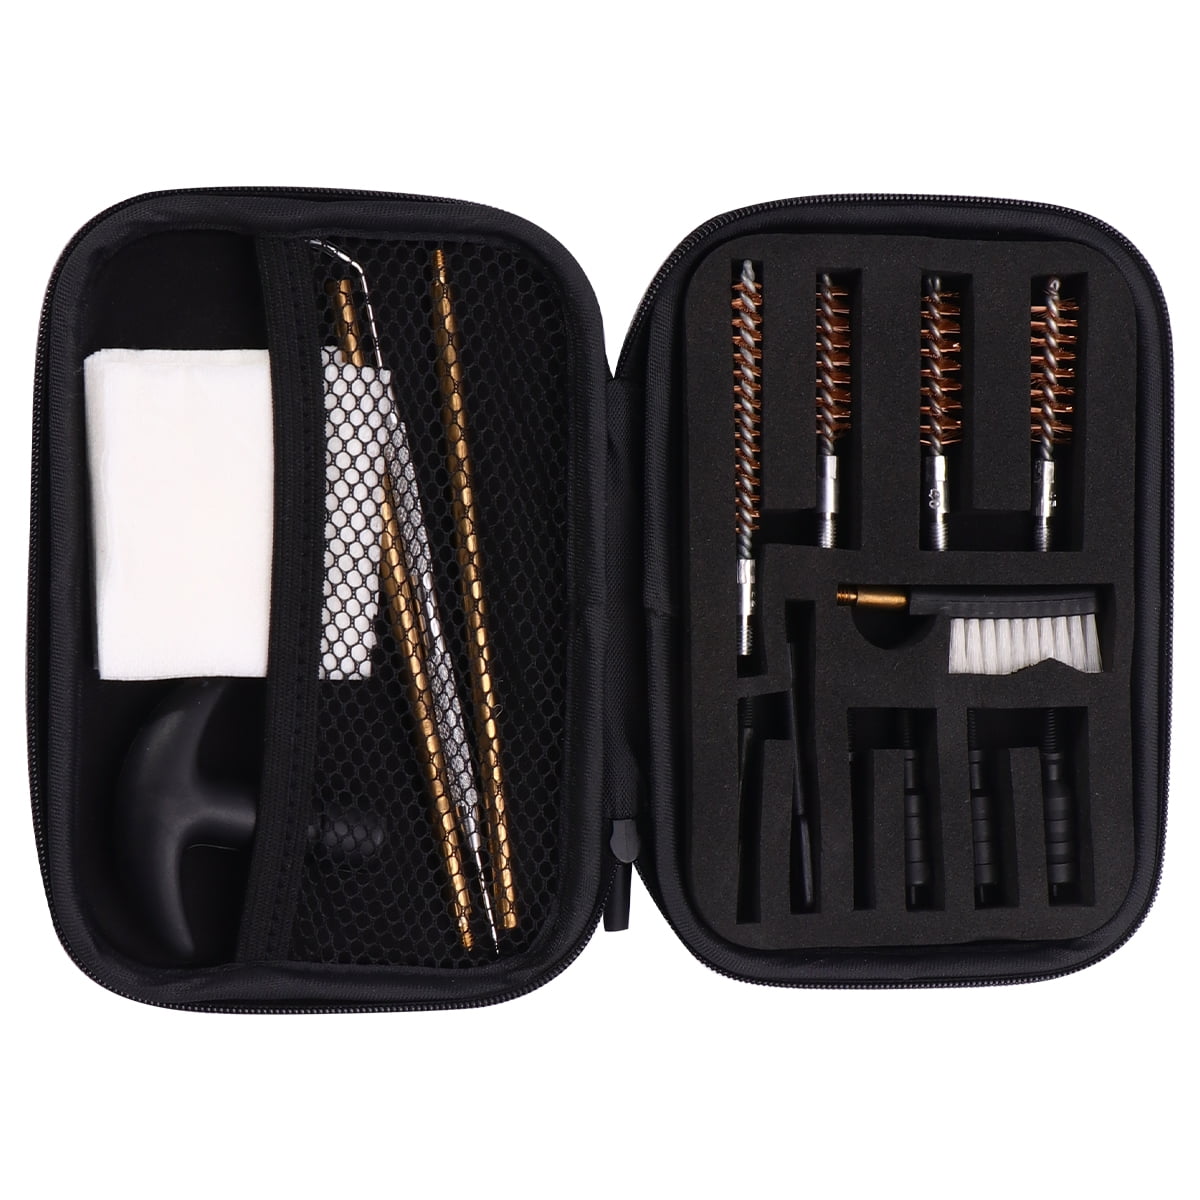 16Pcs Hunting Rifle Pistol Cleaning Kit For All Caliber .22 357 38 40 44 45 9mm 